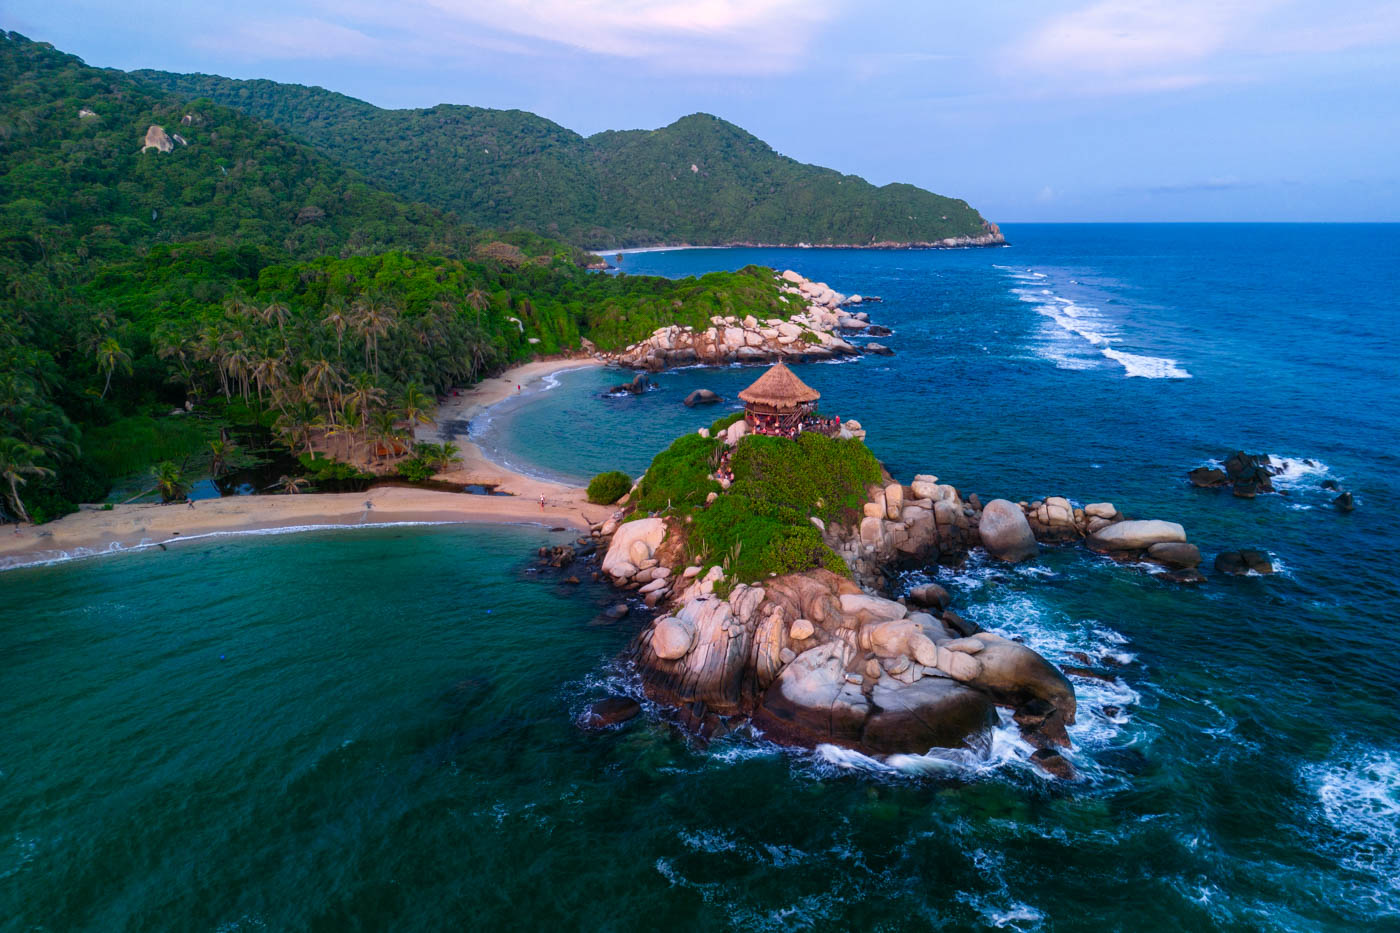 Mirador tower at Cabo San Juan perched on a rocky outcrop at sunrise with views over Tayrona National Park.